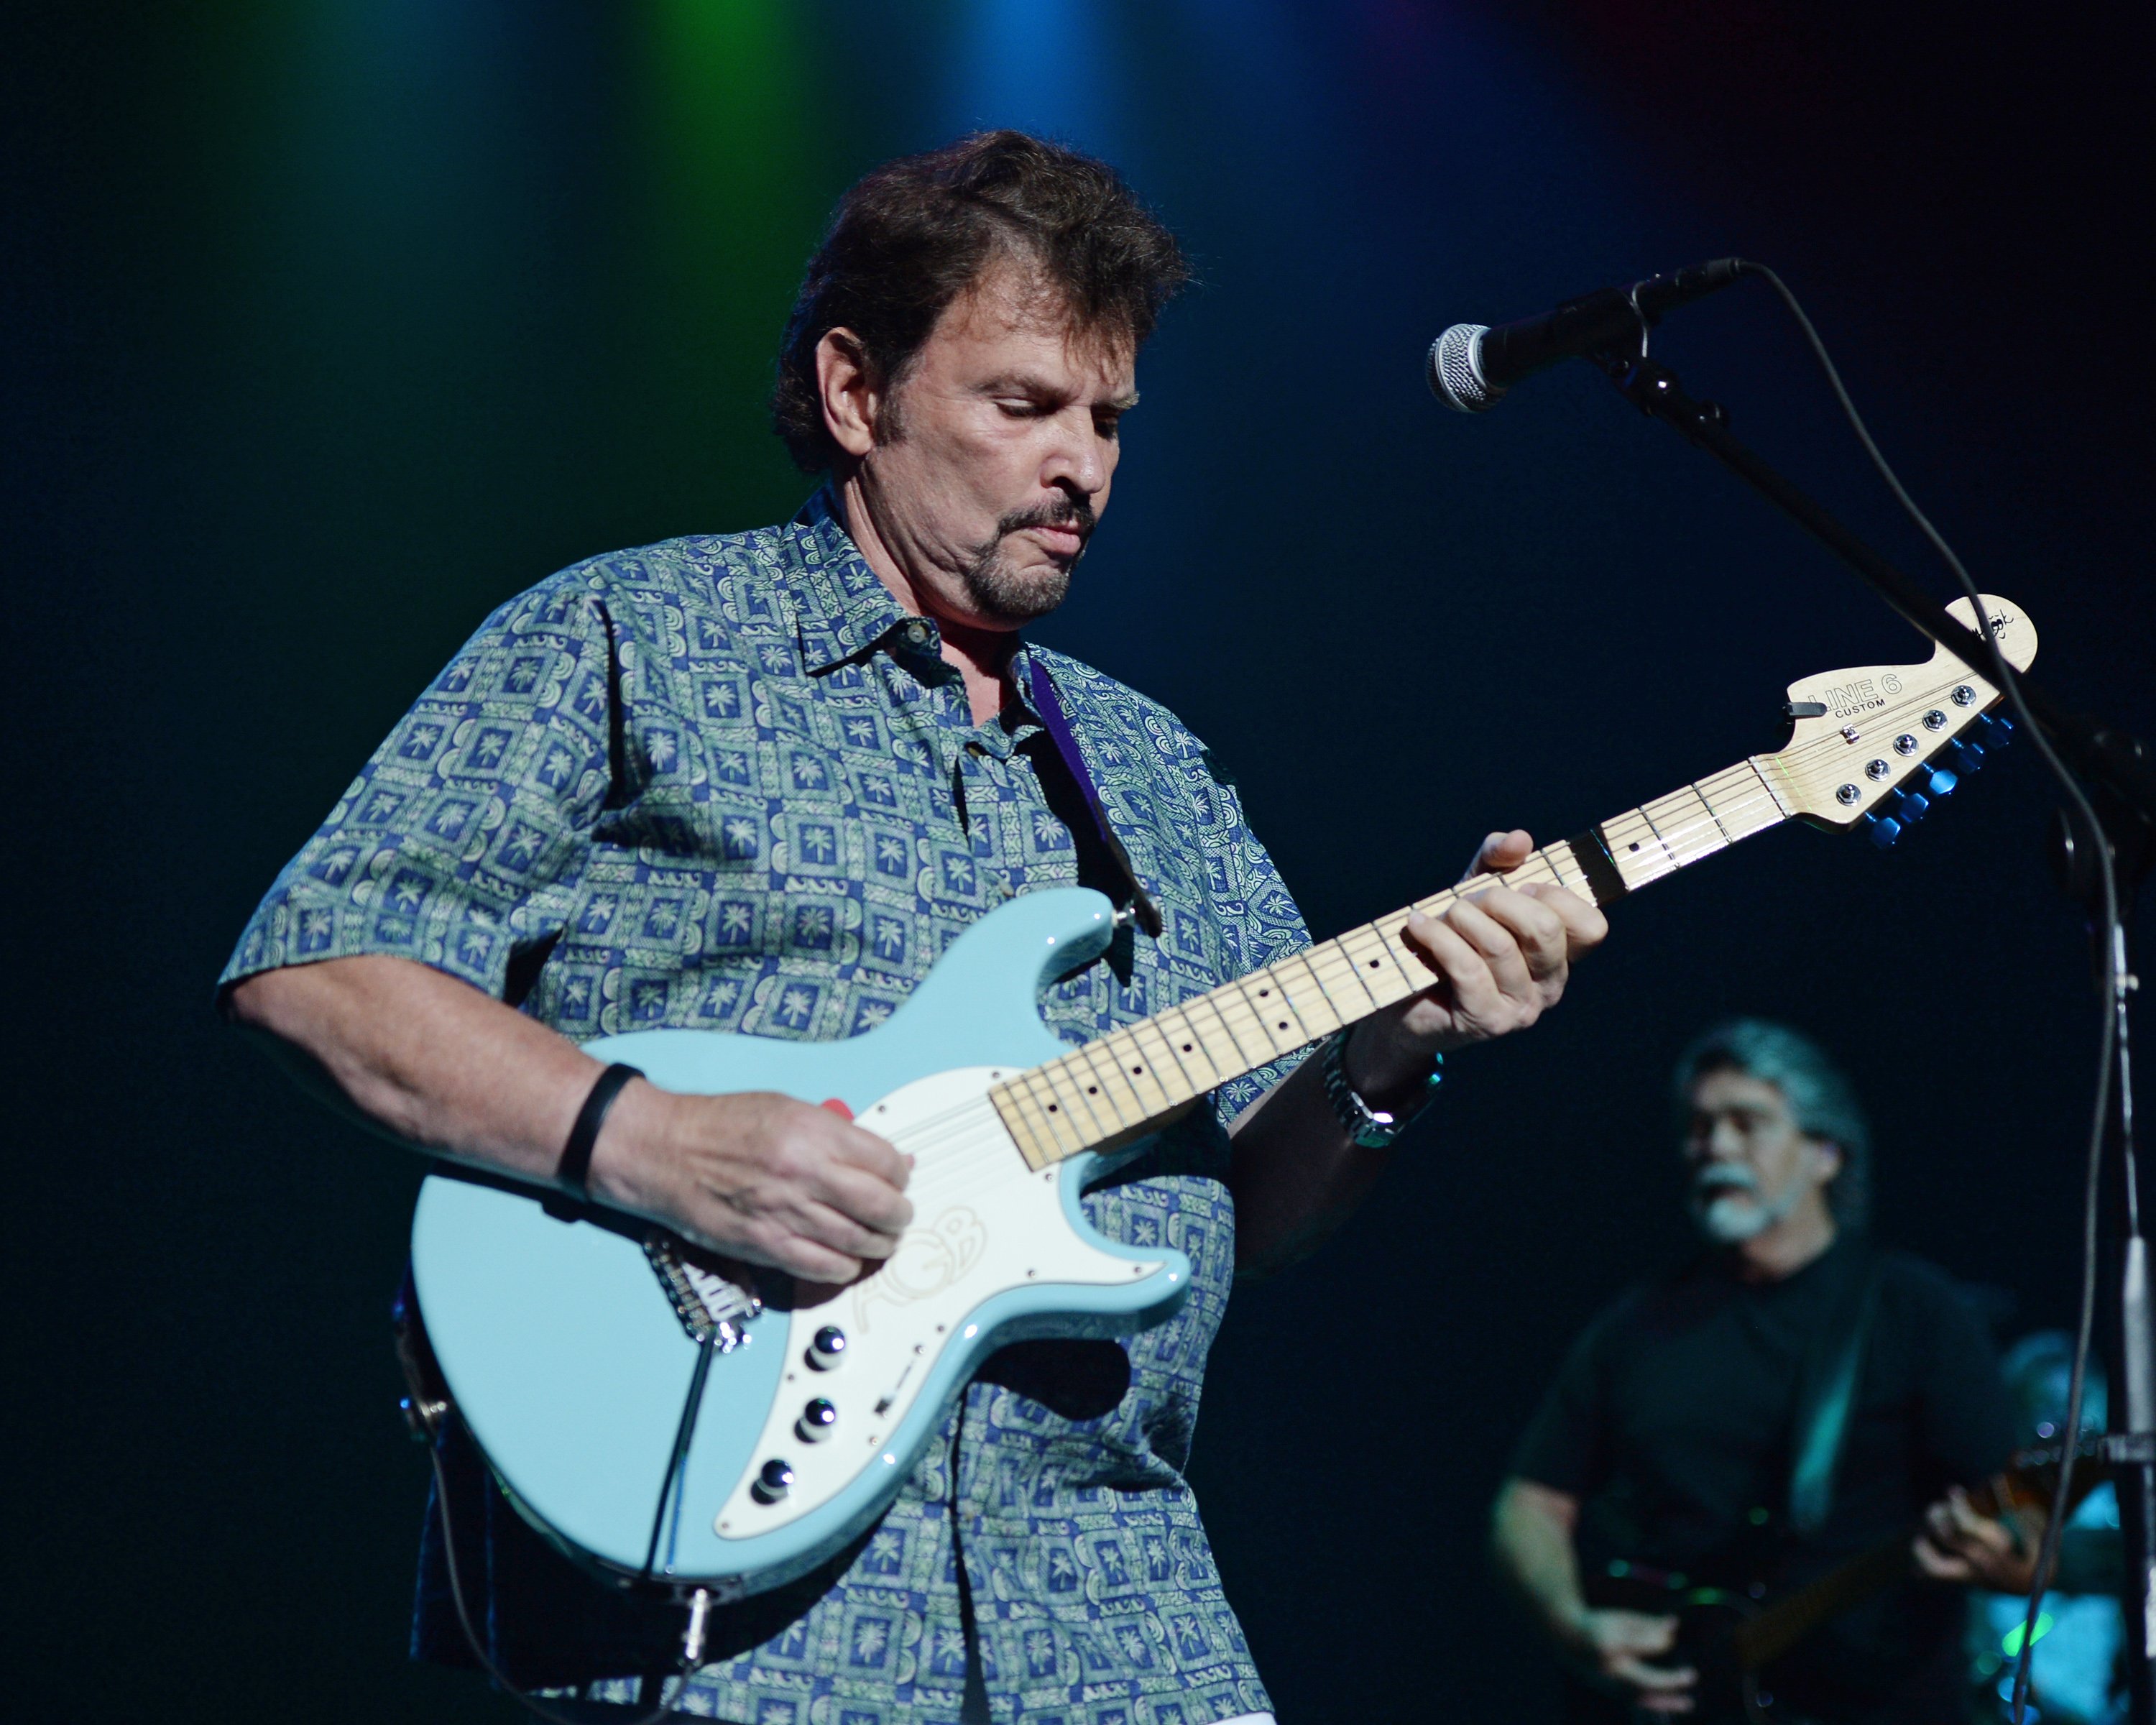 Jeff Cook of Alabama performs at Hard Rock Live! in the Seminole Hard Rock Hotel & Casino on August 10, 2013 in Hollywood, Florida | Source: Getty Images 